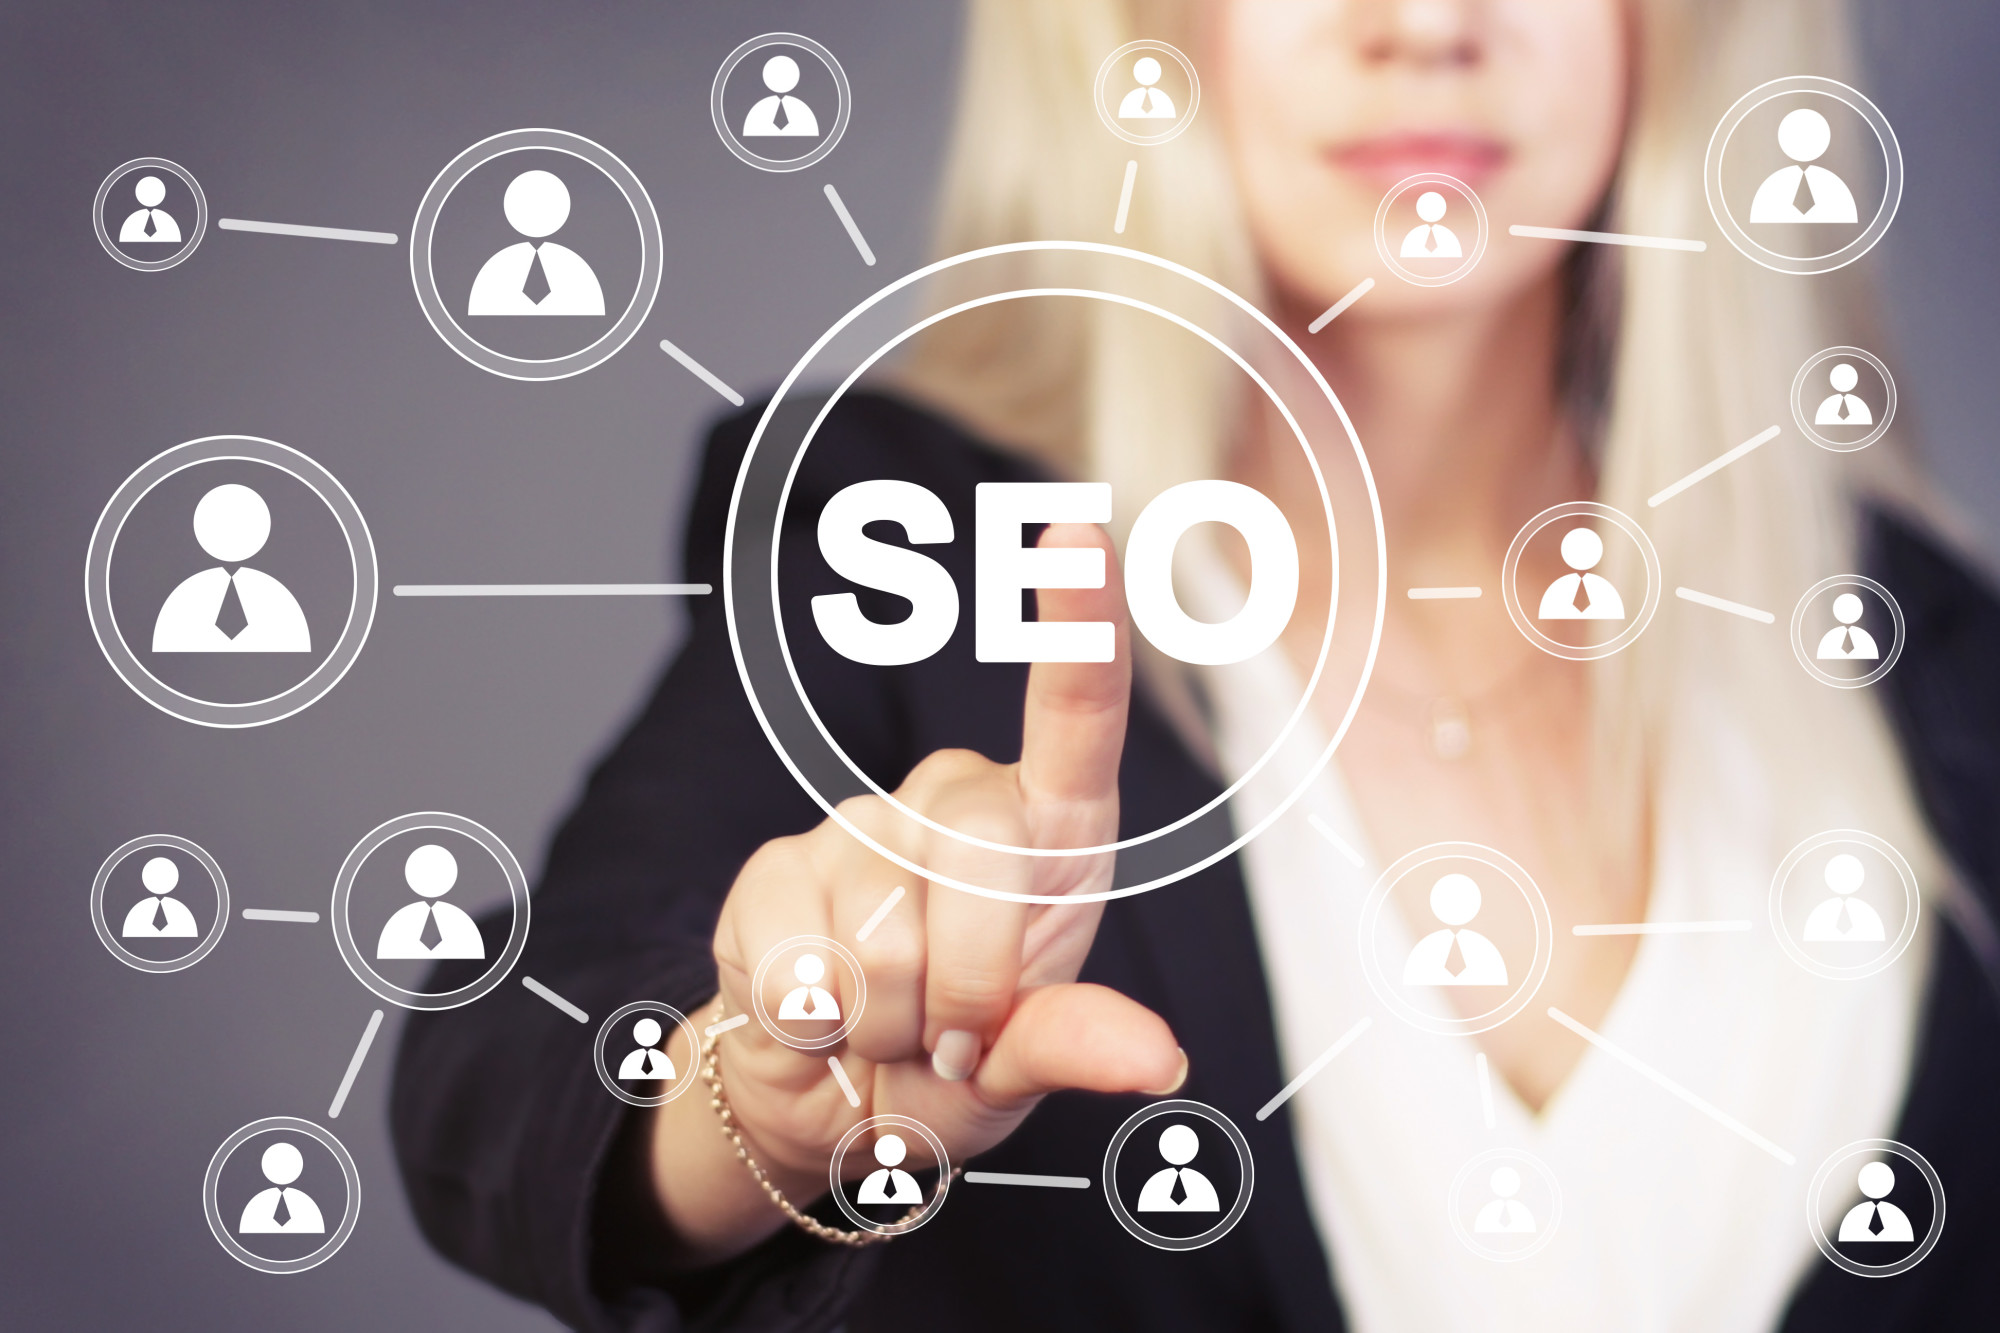 professional SEO services